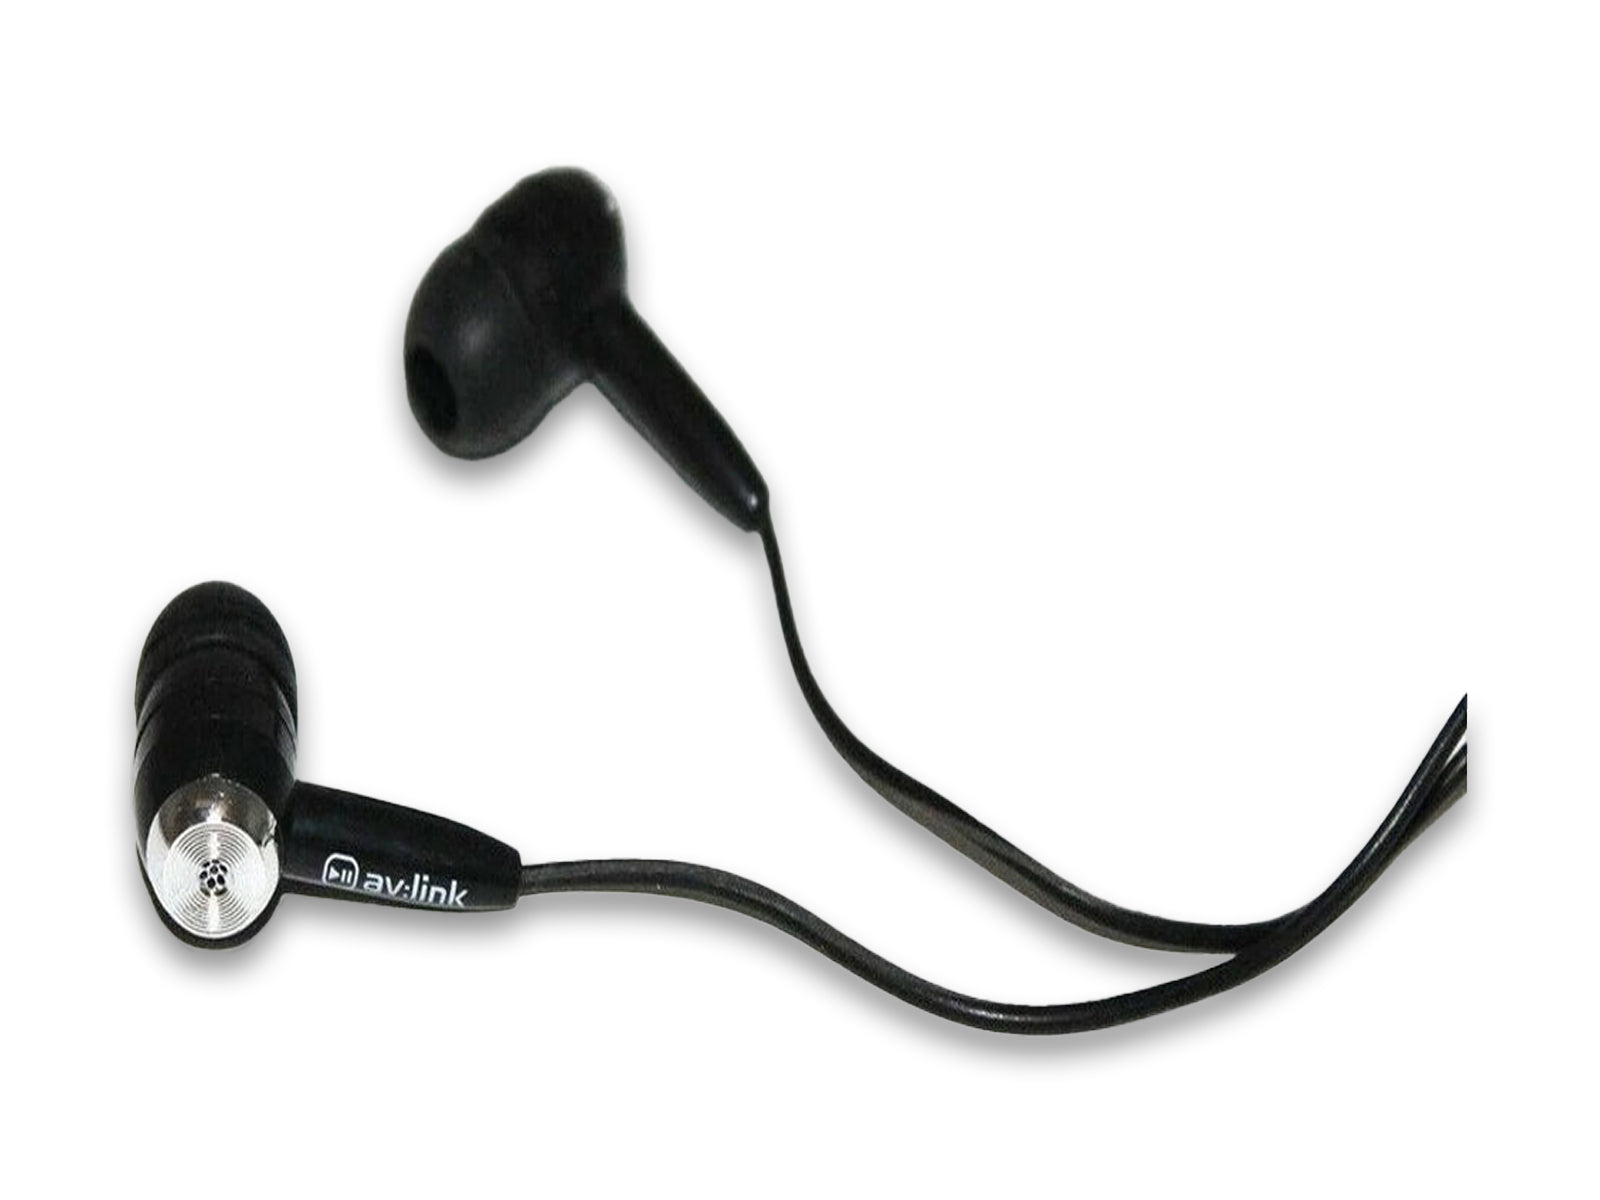 Ear Buds With 3.5mm Stereo Jack Show Ear Buds